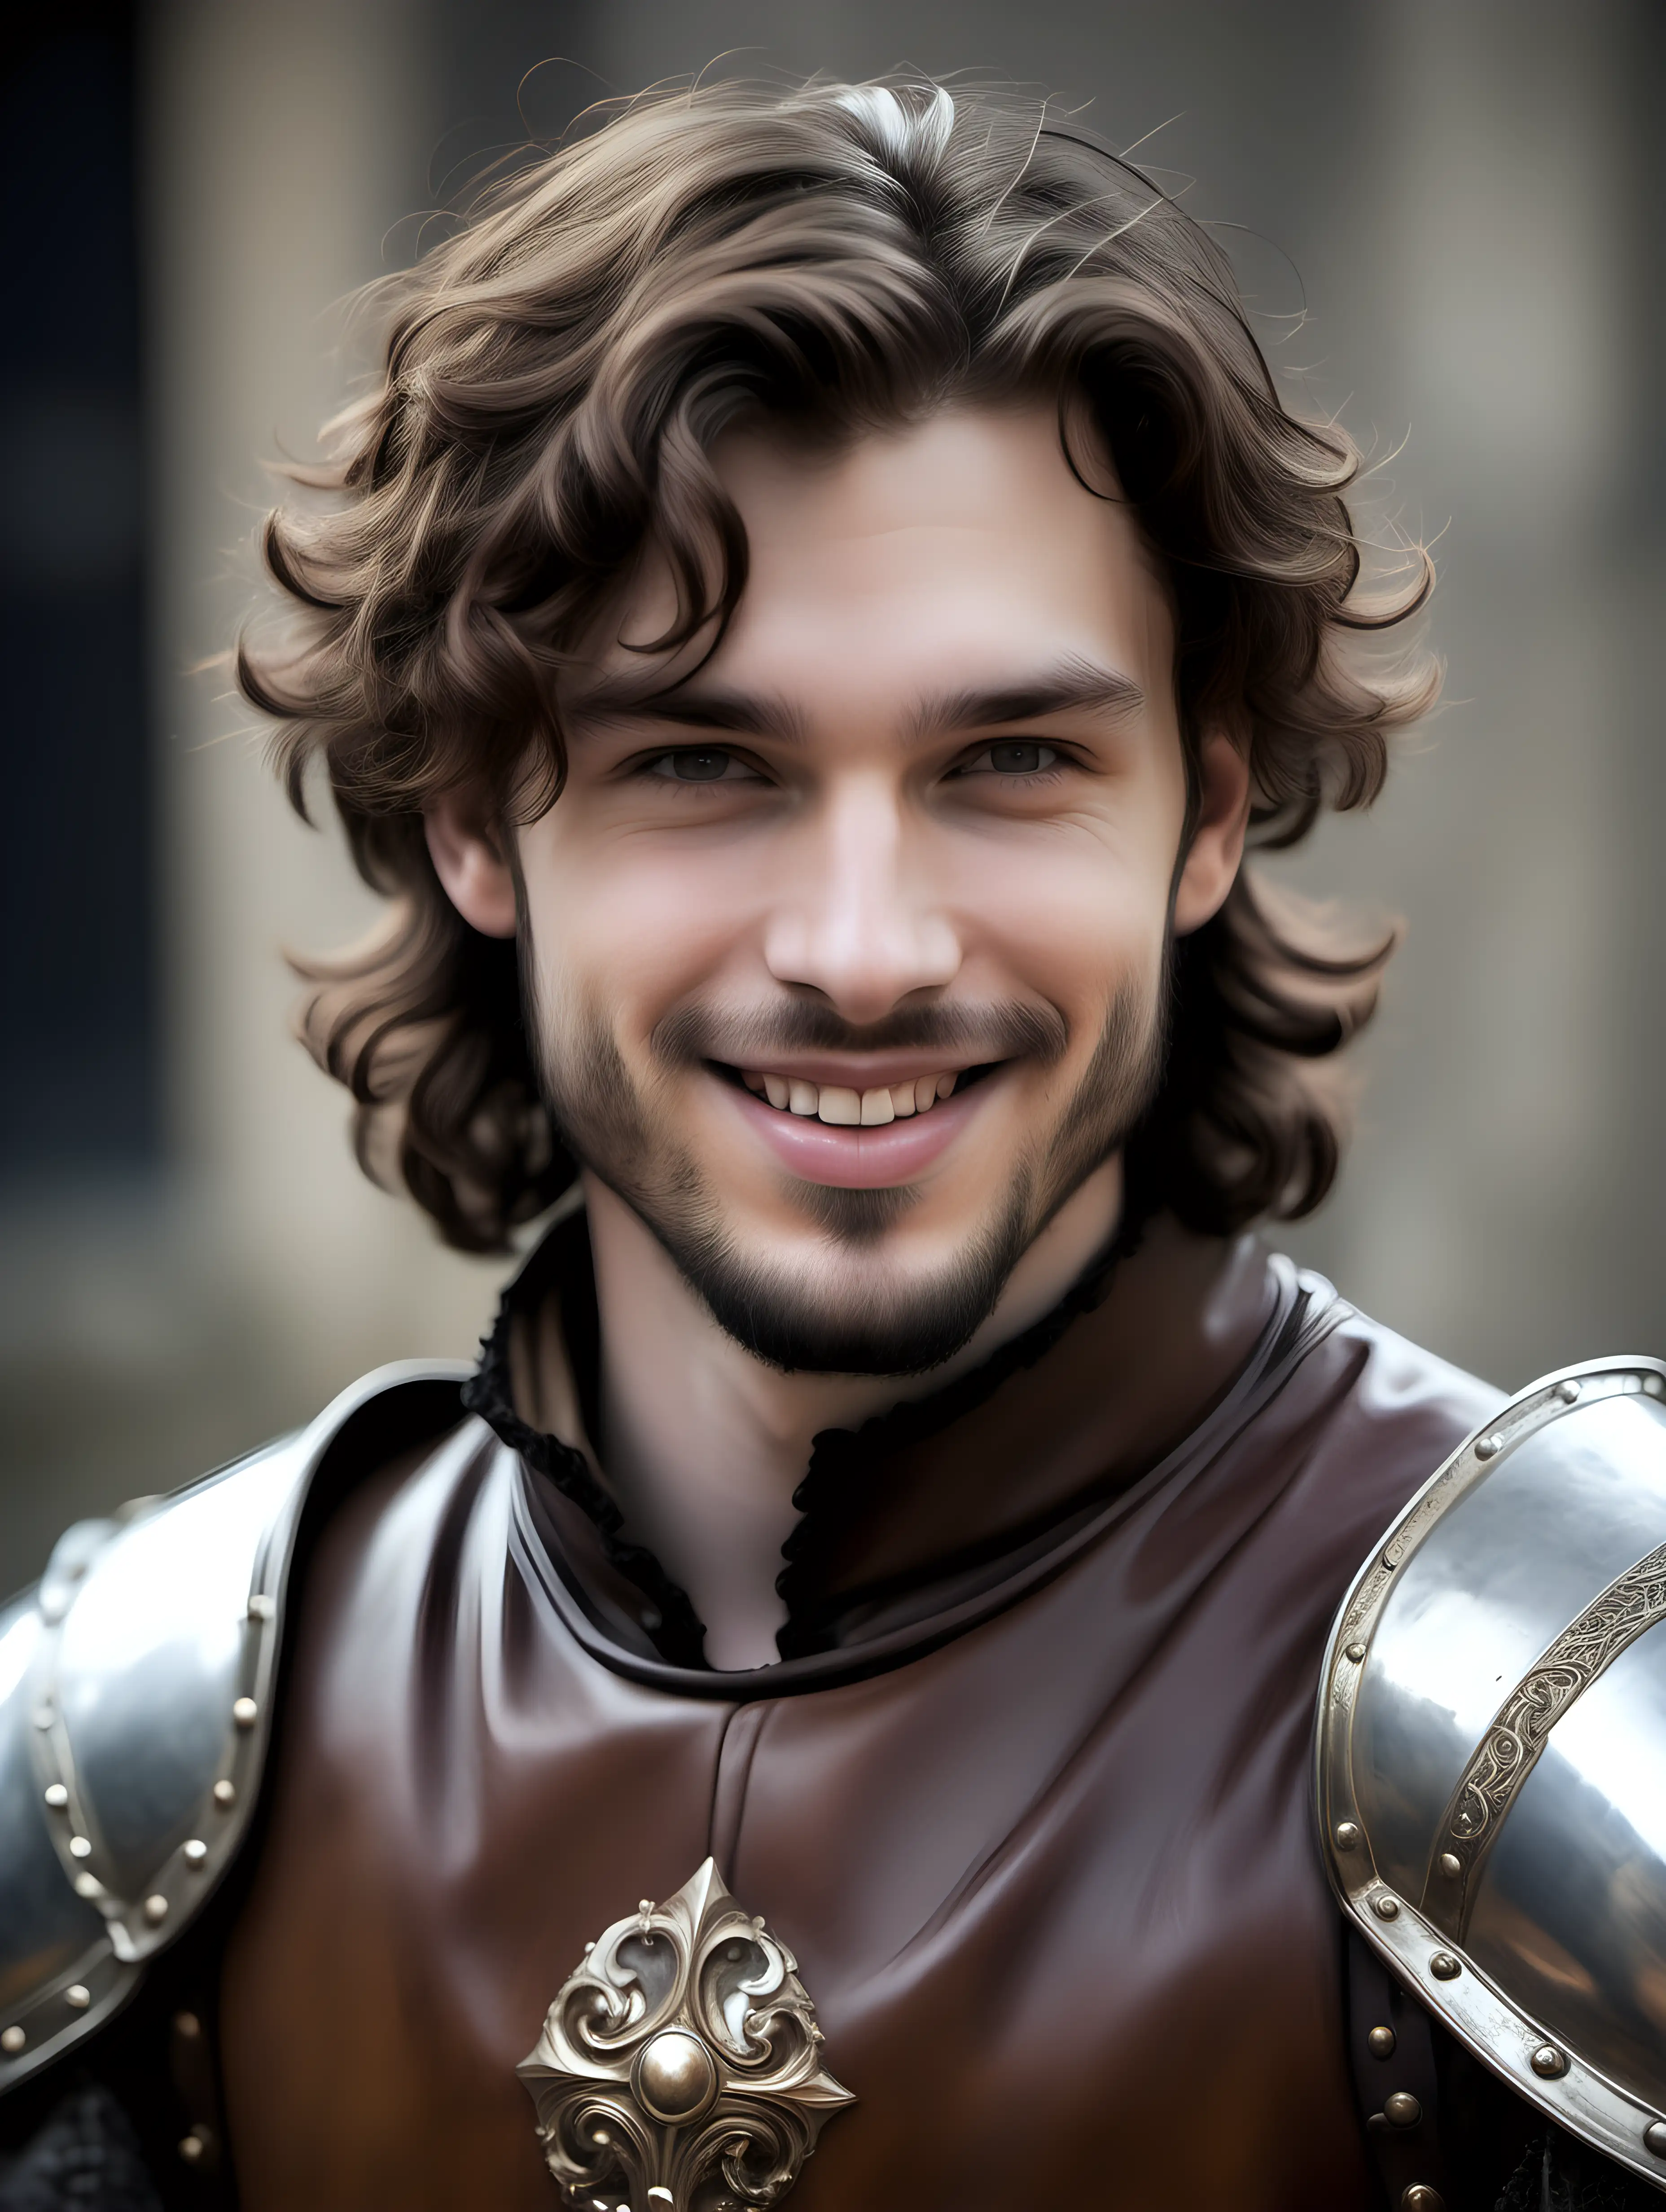 Smiling Handsome Prince in Medieval Leathers with Wavy Brown Hair